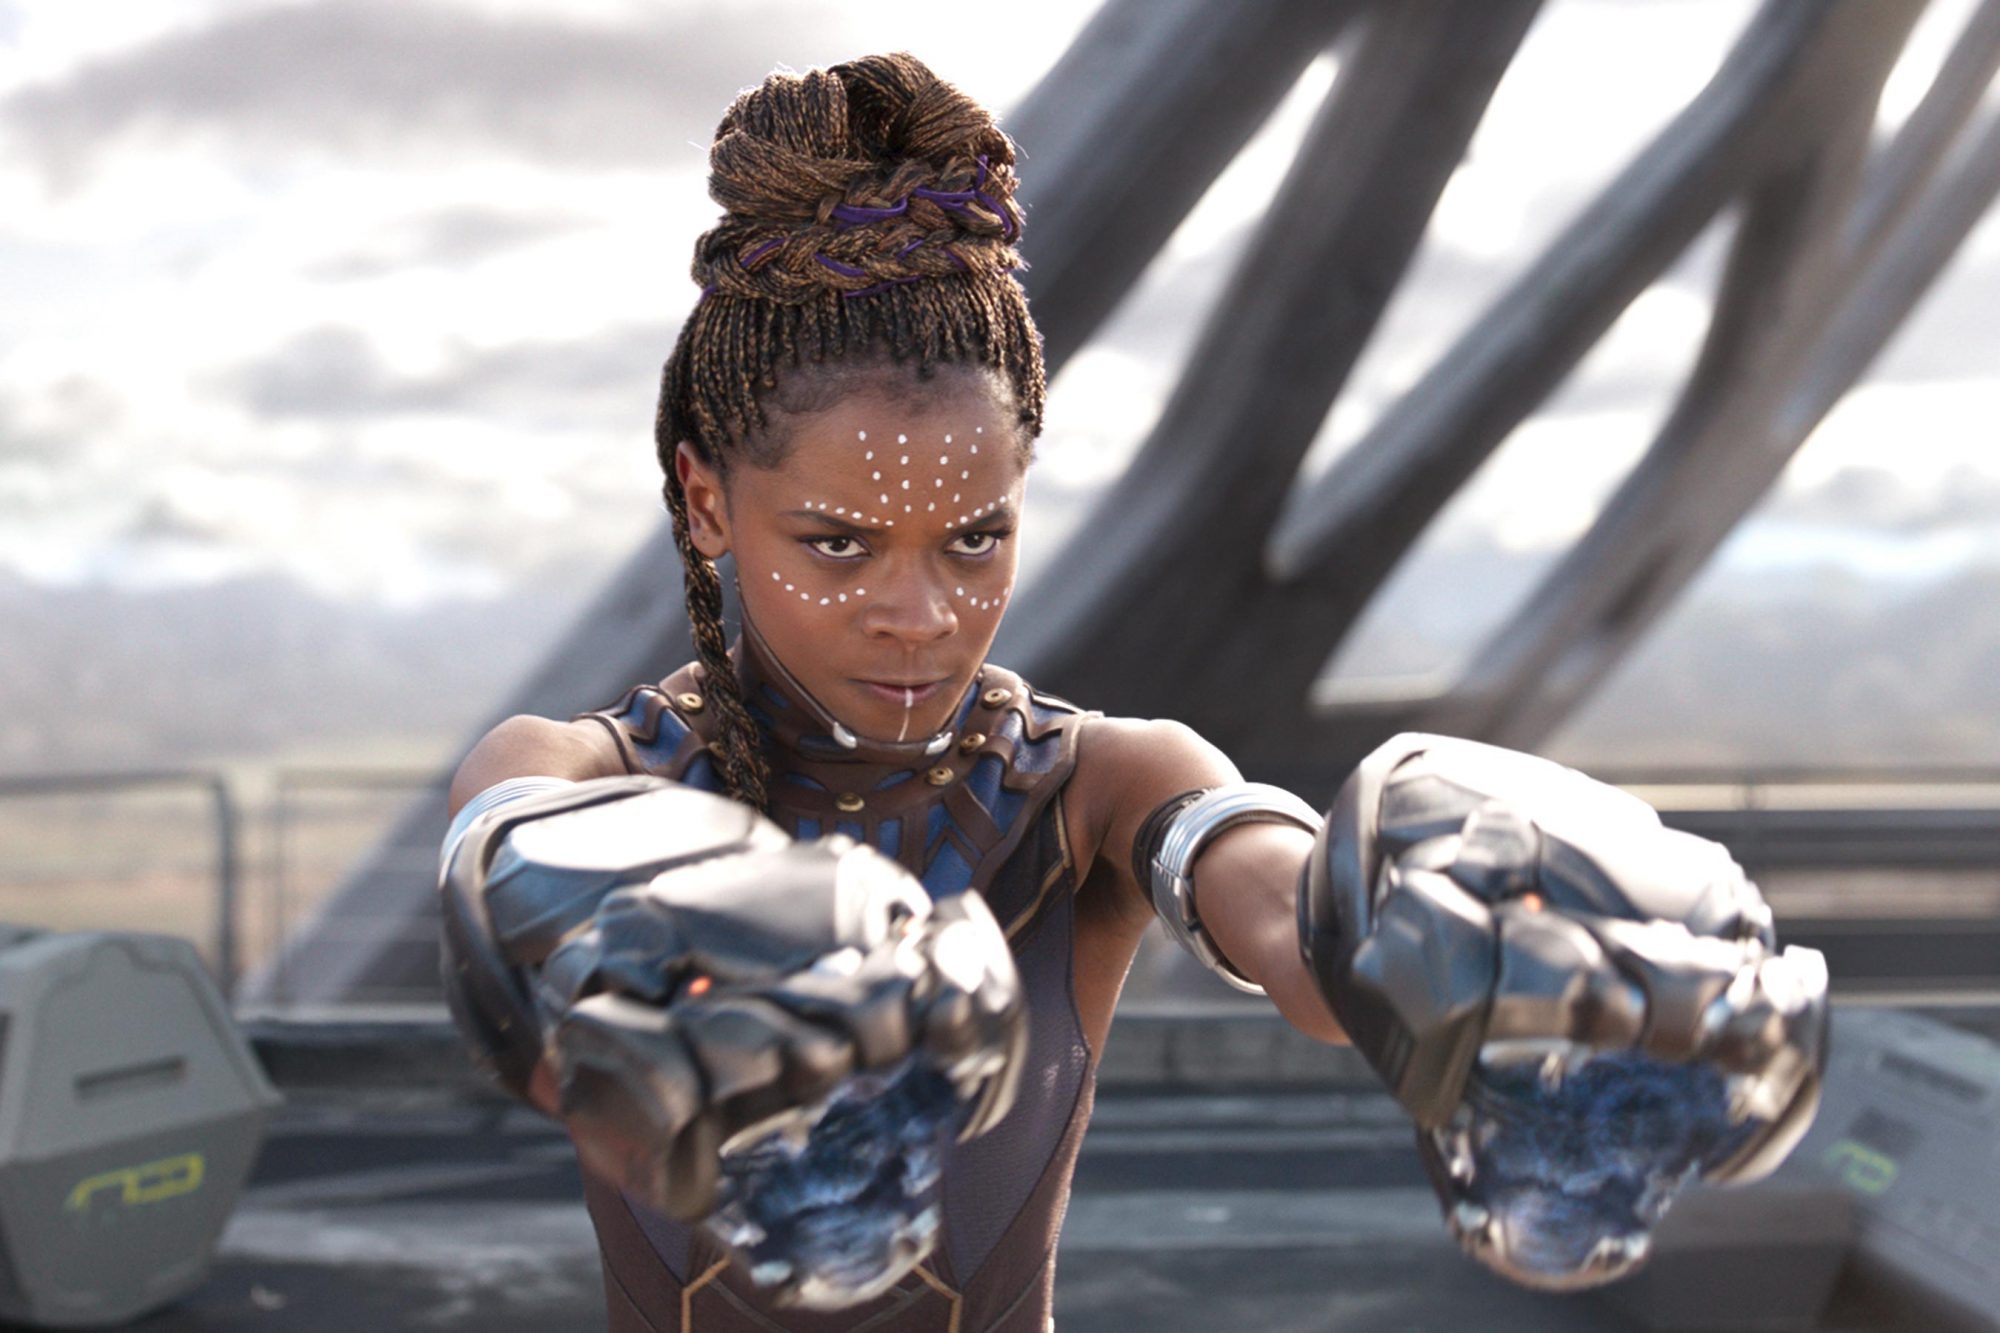 Black Panther Actress Letitia Wright injured while filming sequel